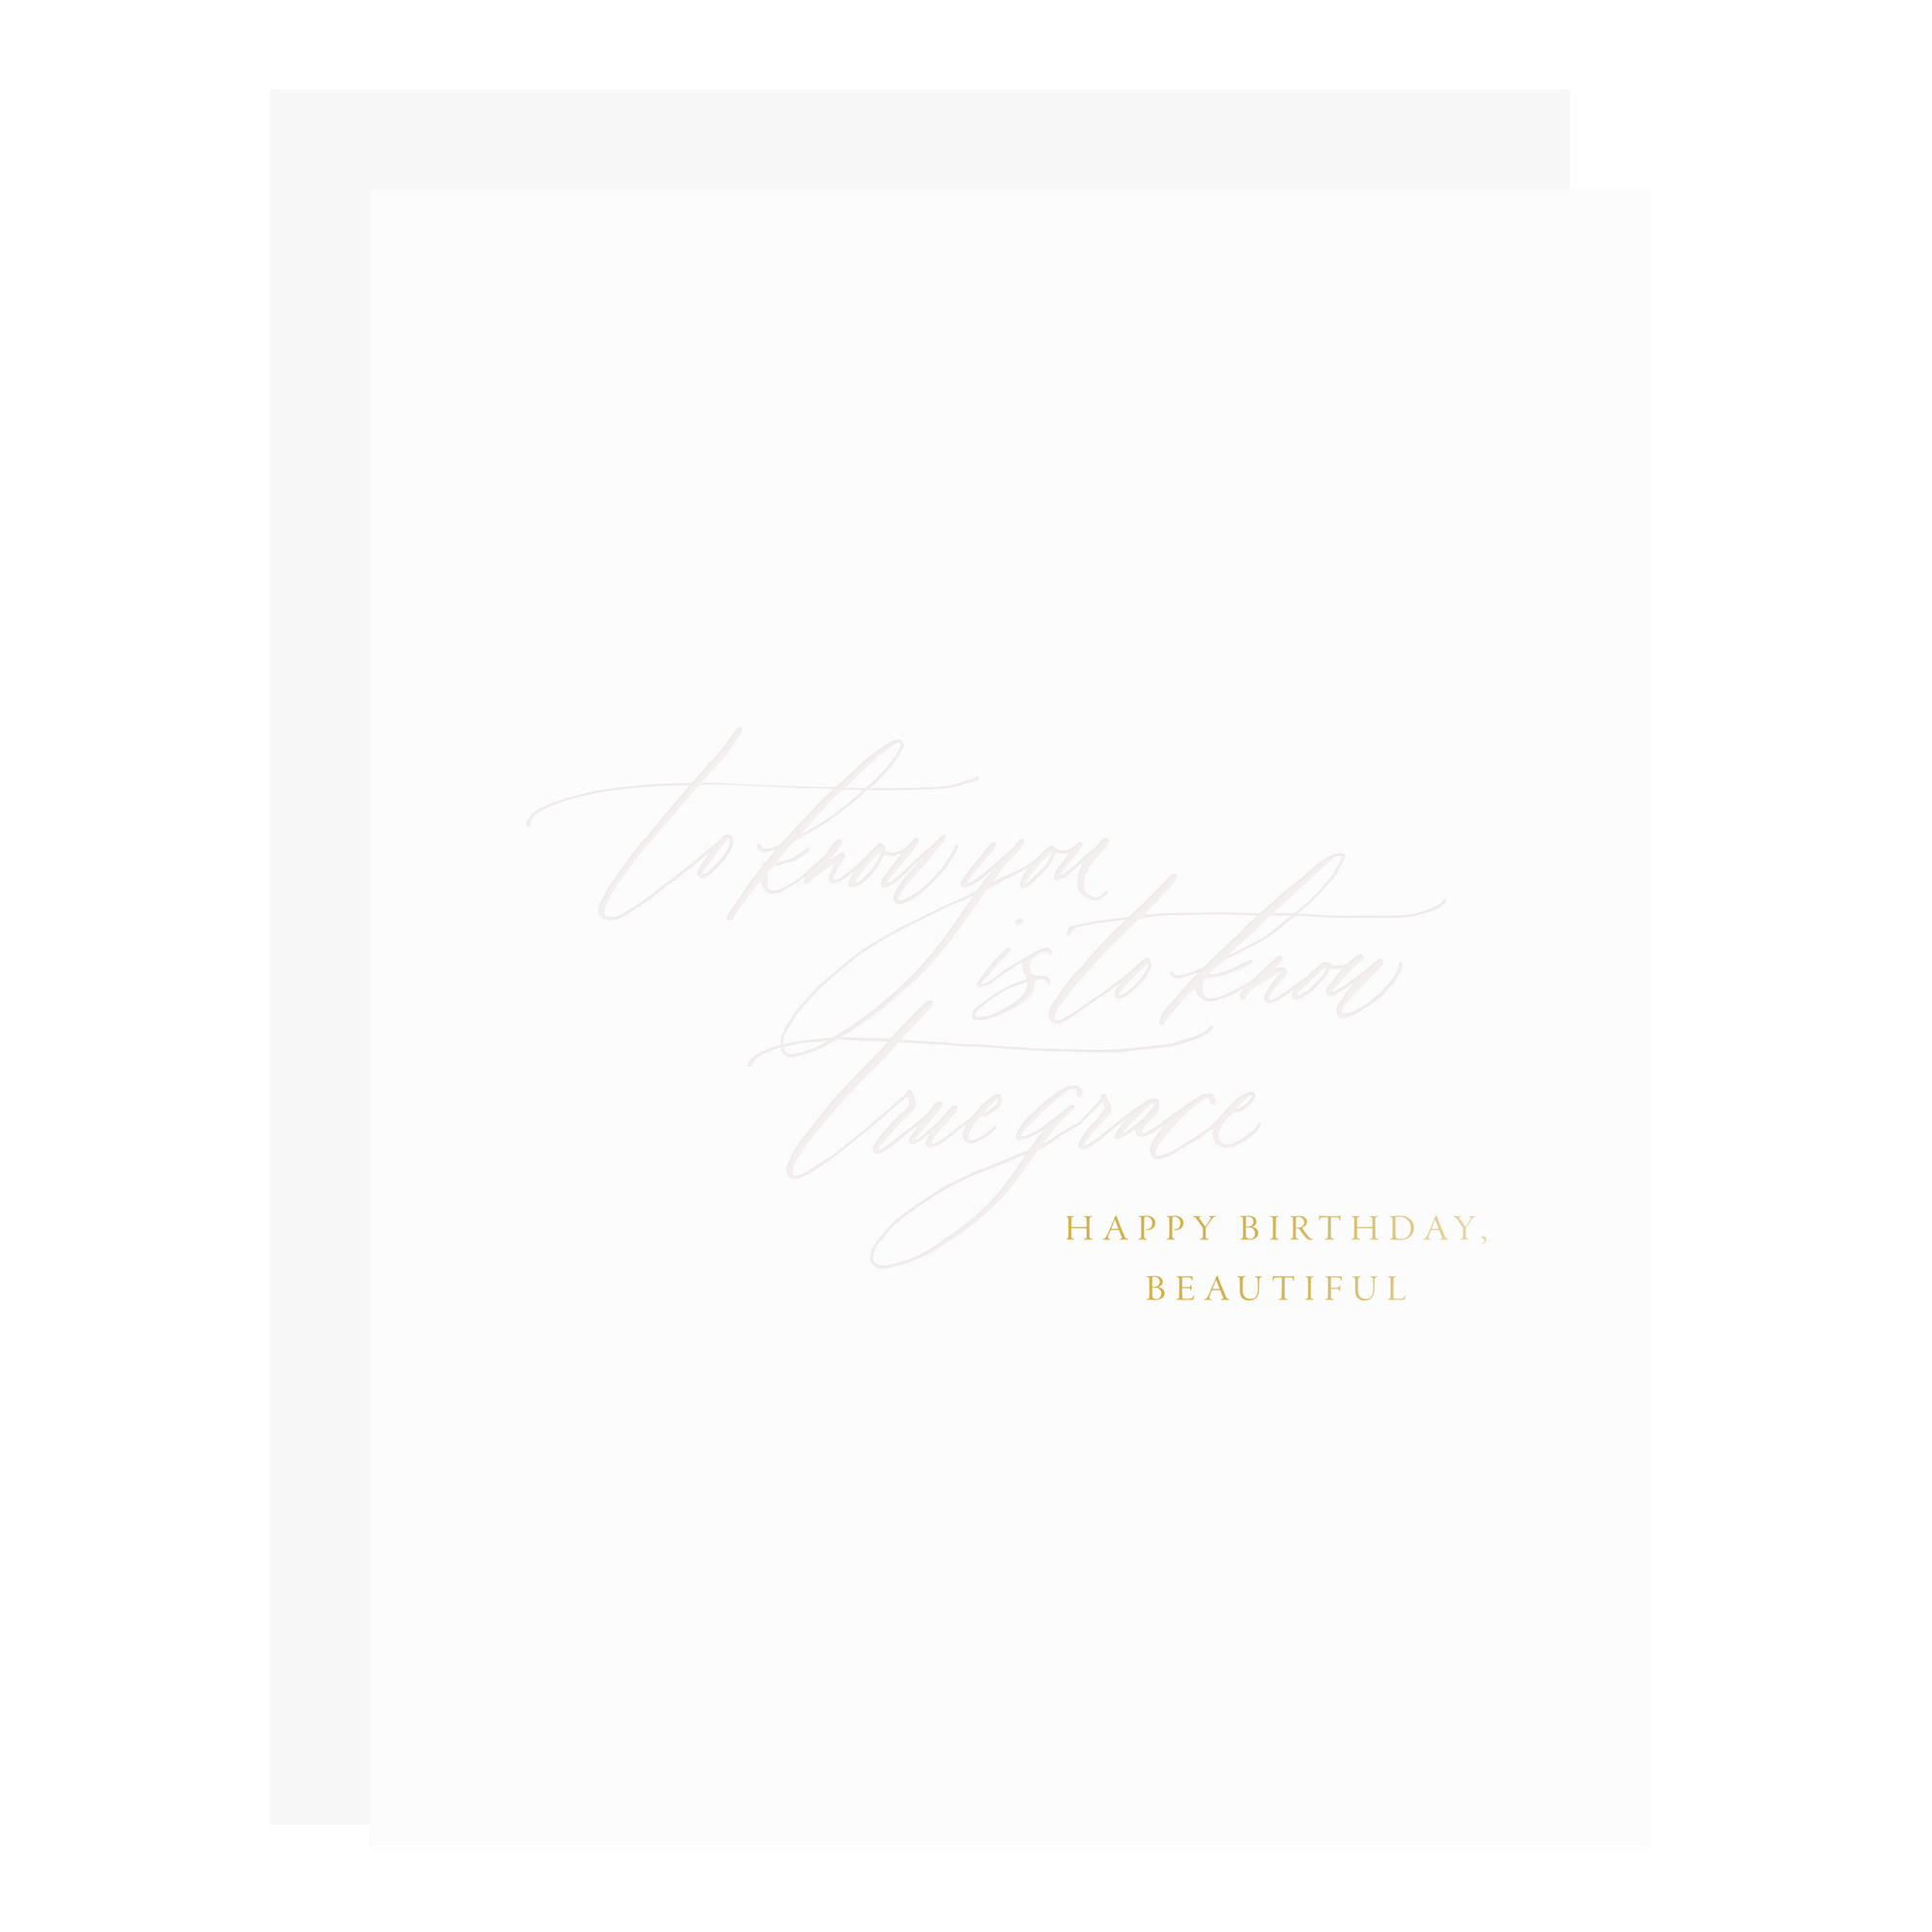 "True Grace Birthday" card, letterpress printed by hand in pale blush ink and gold foil.